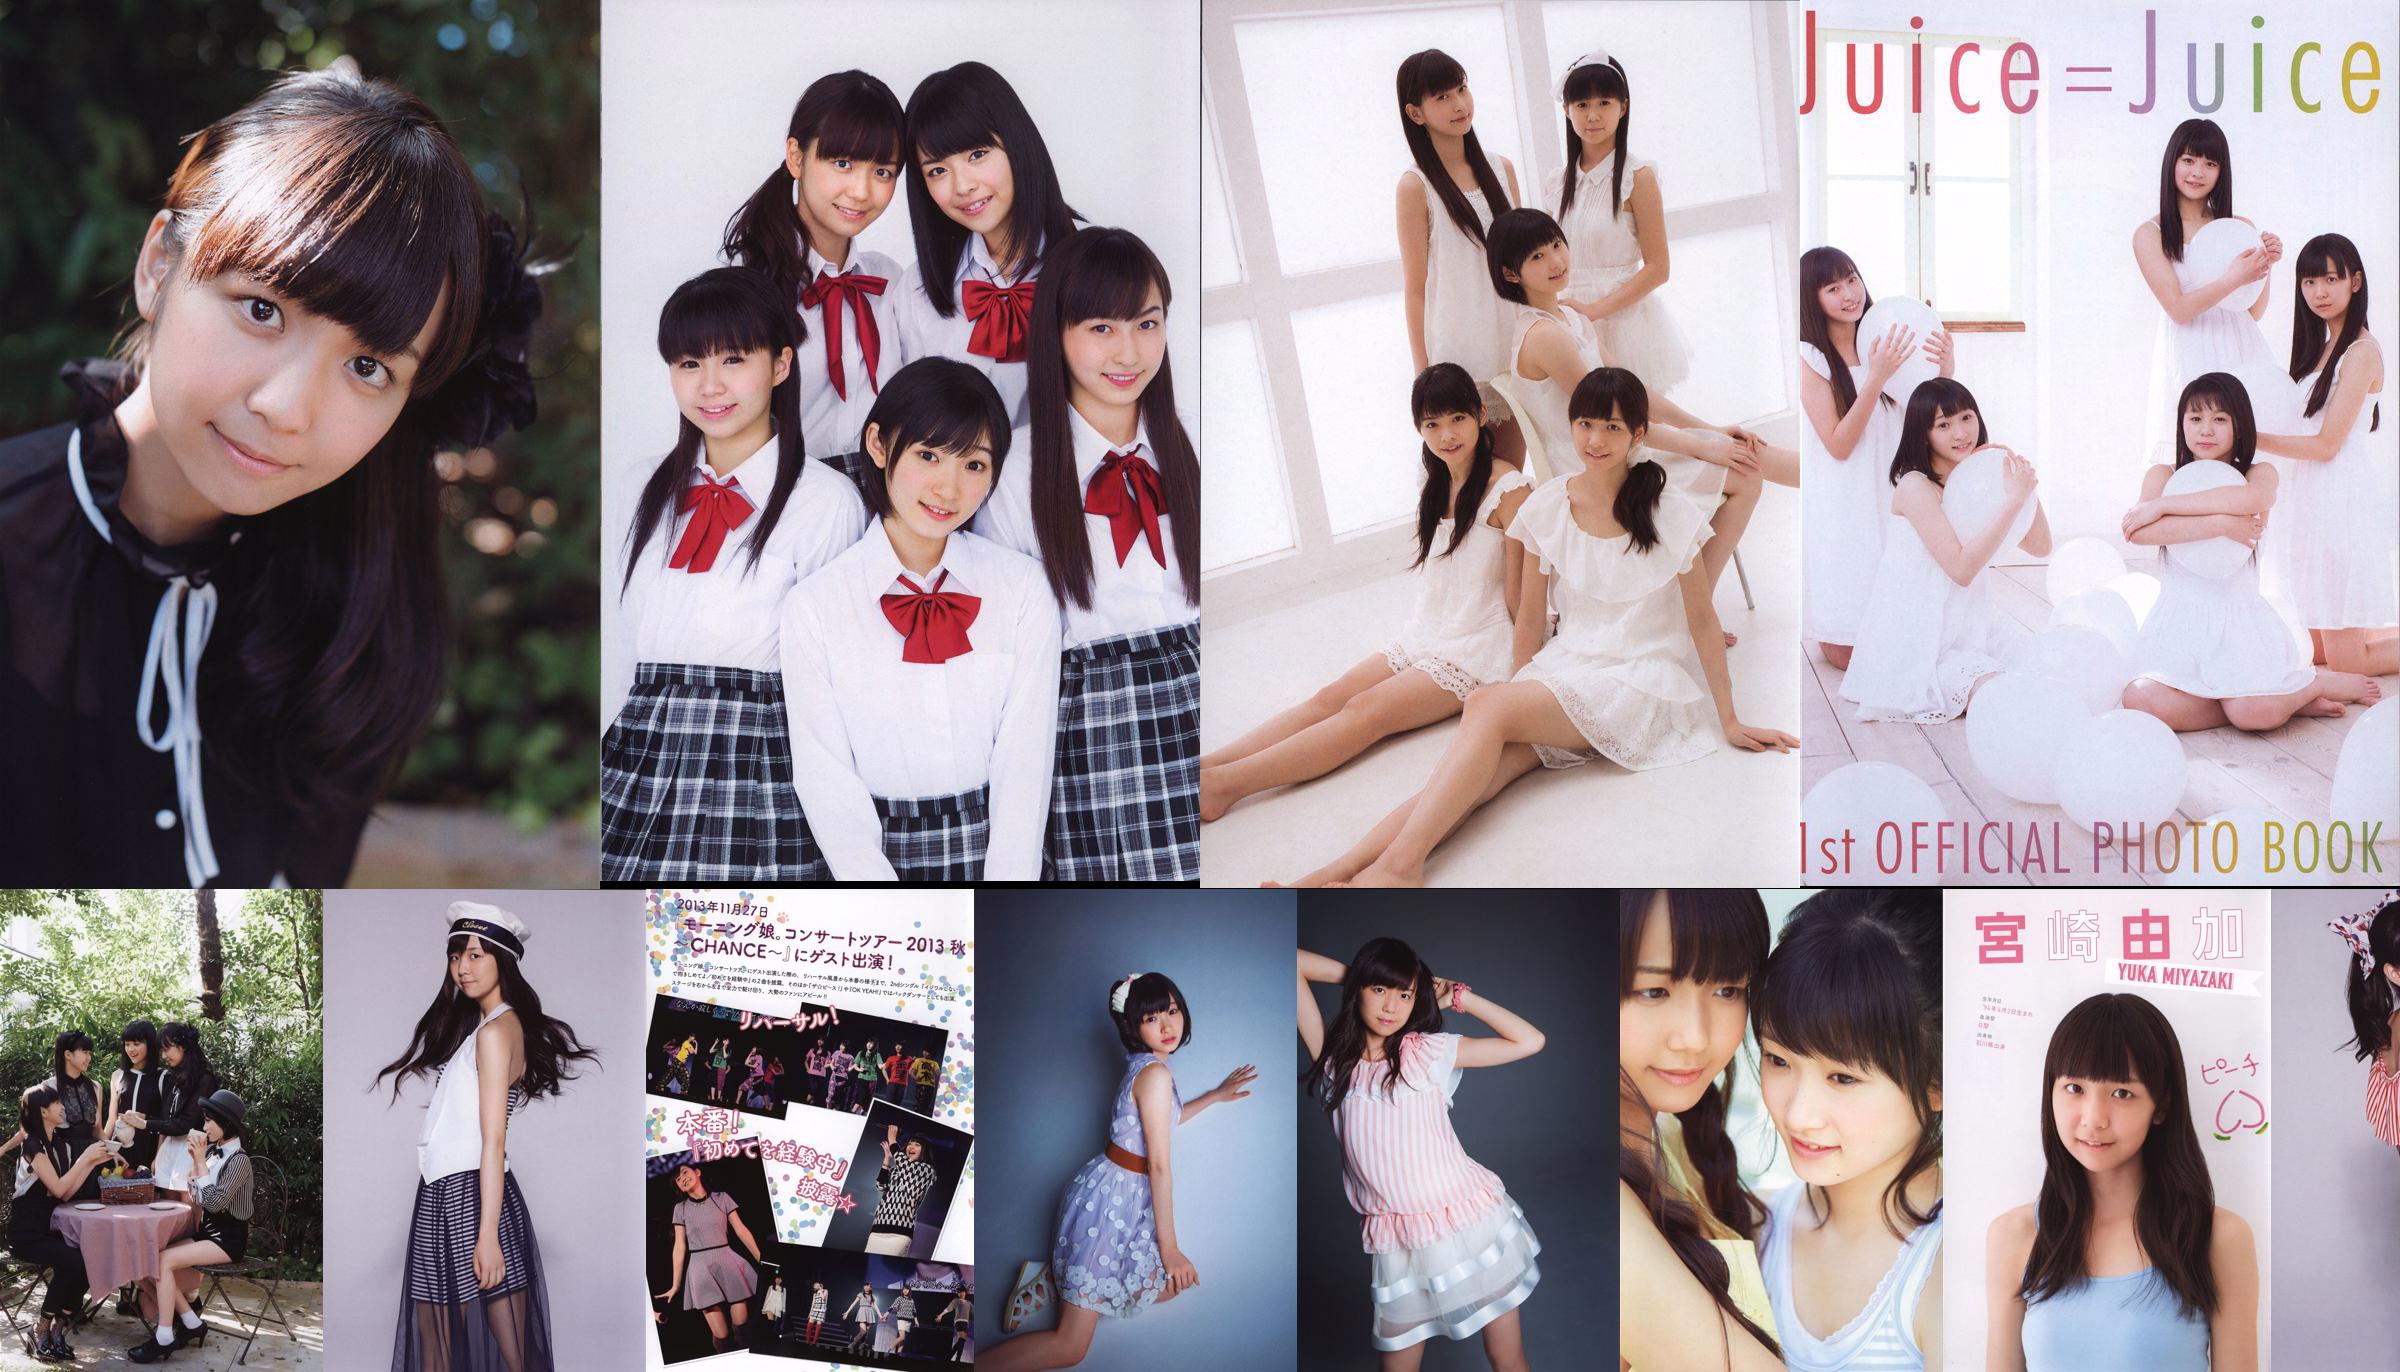 Japanese beautiful girl group Juice=Juice "OFFICIAL PHOTO BOOK" No.65ee2f Page 2